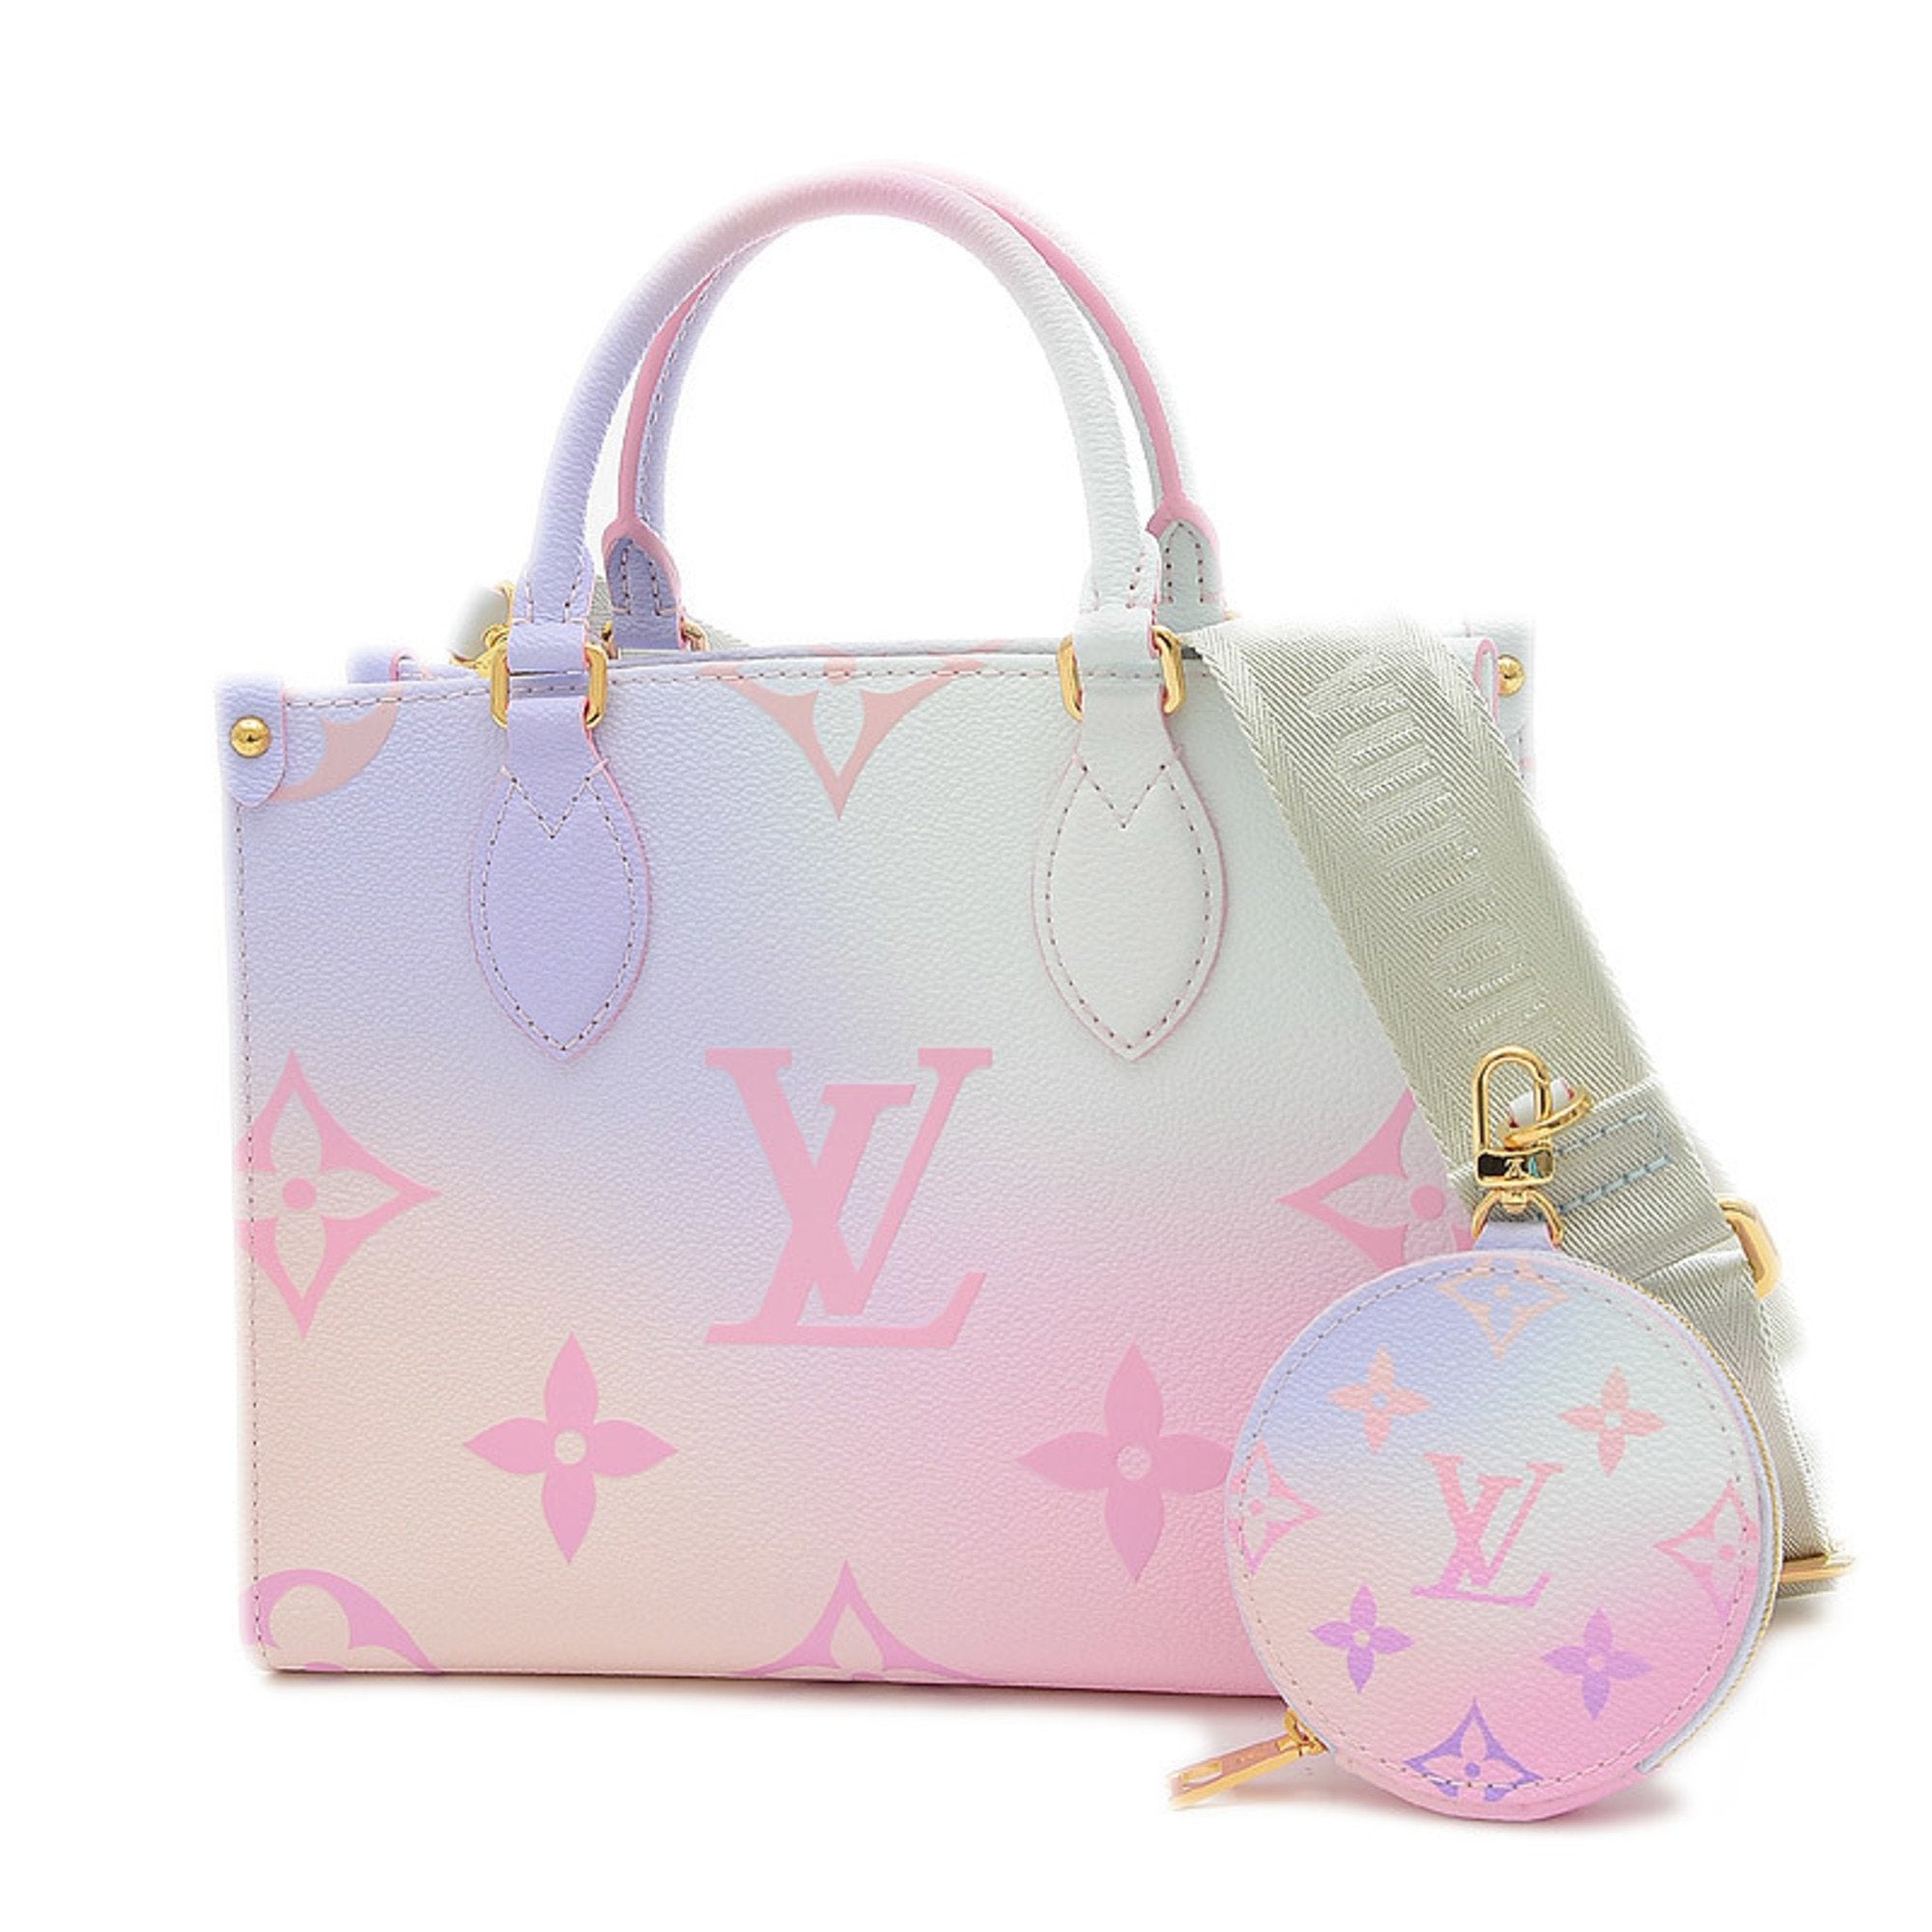 Check Out The New Louis Vuitton 'Spring In The City' Capsule